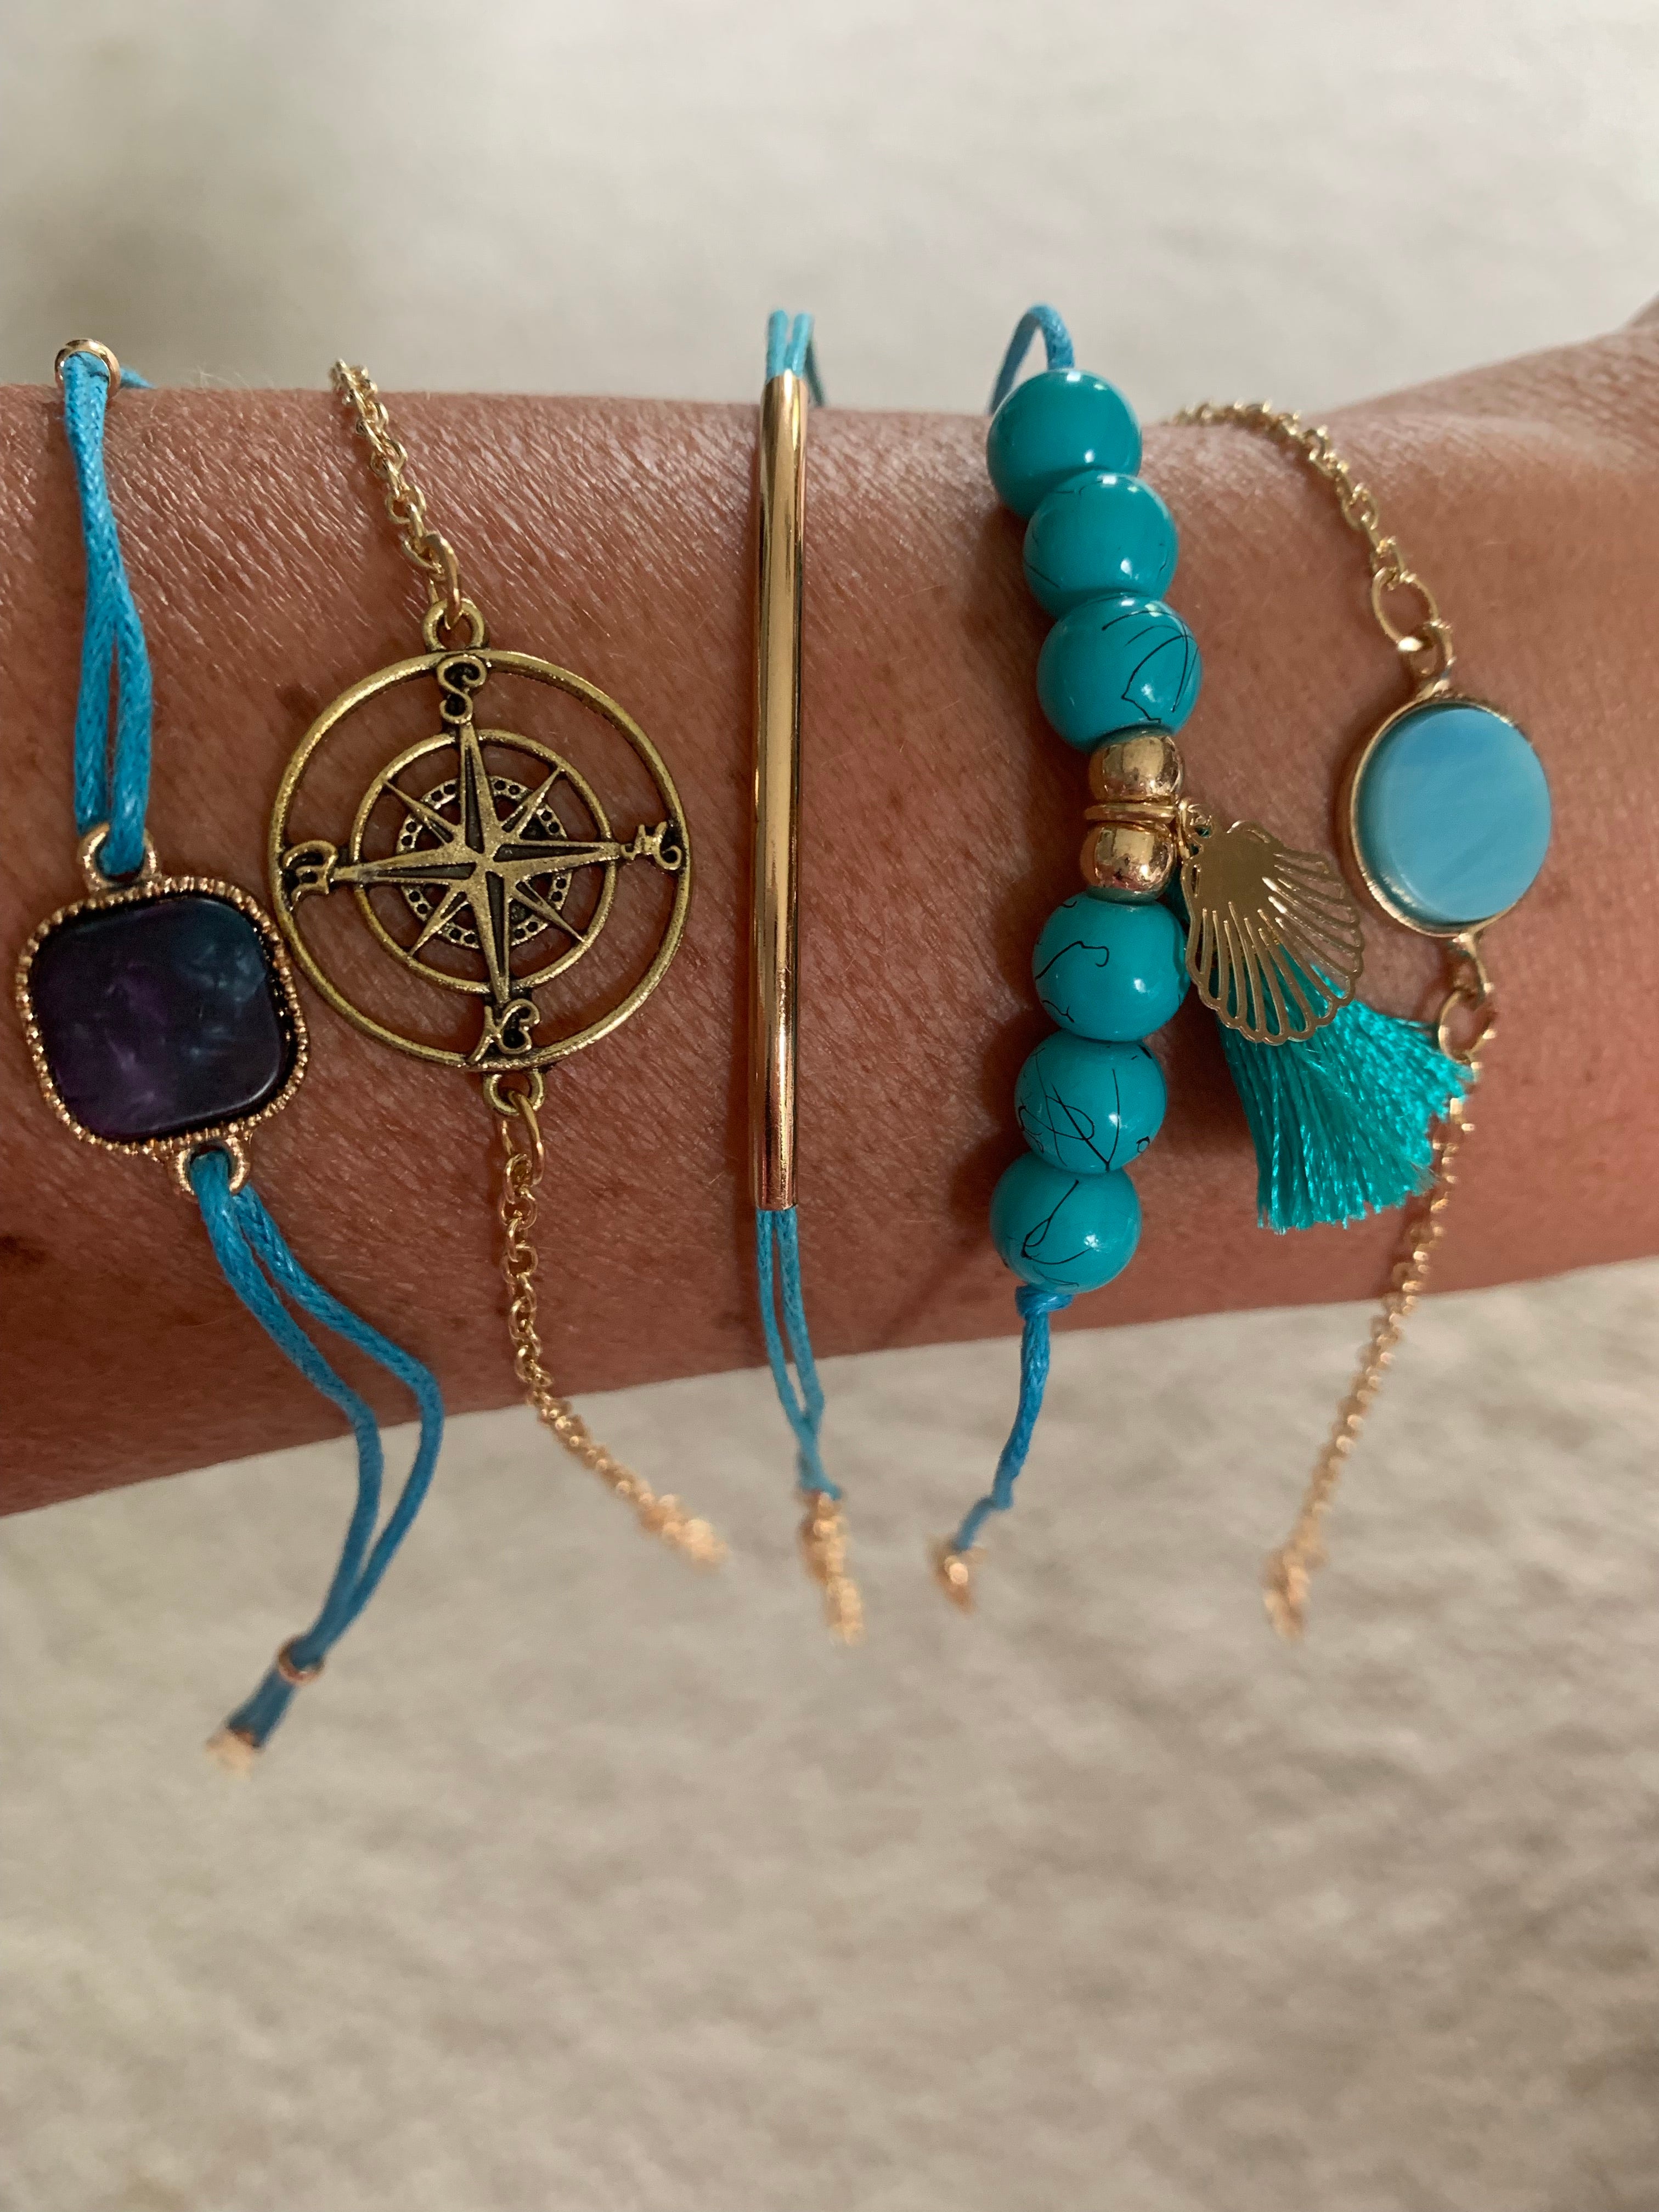 Turquoise beaded. gold chain, and strings adjustable bracelet set. Contains 6 pieces. Can be worn separate, all together, or any way you want to wear them!